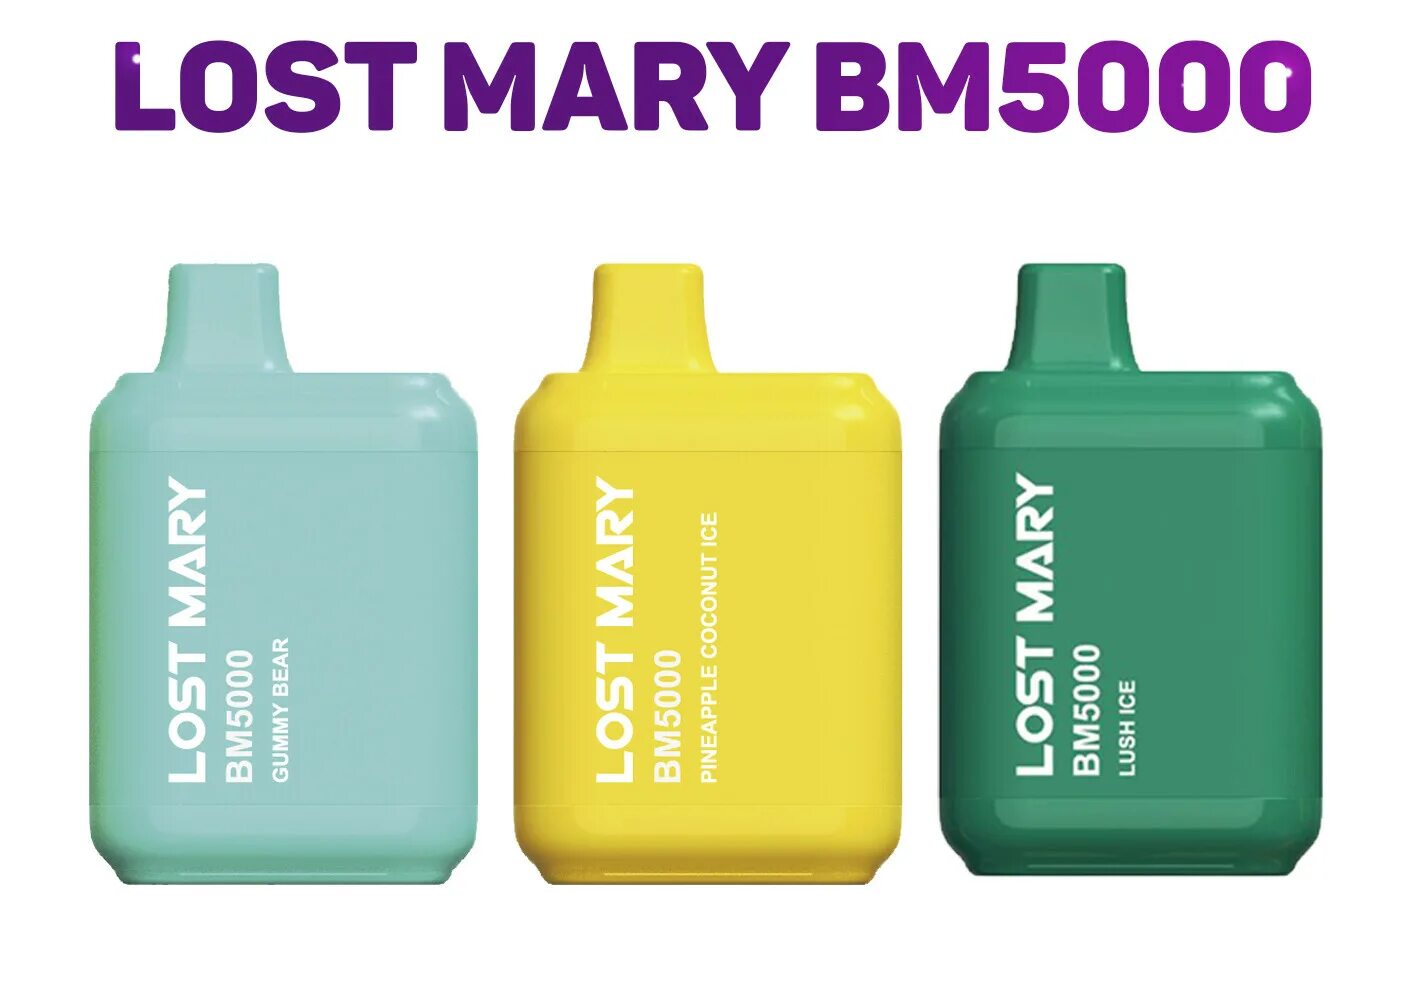 Лост мери сд 10000. Lost Mary bm5000. Lost Mary Elf Bar. Одноразки Lost Mary.